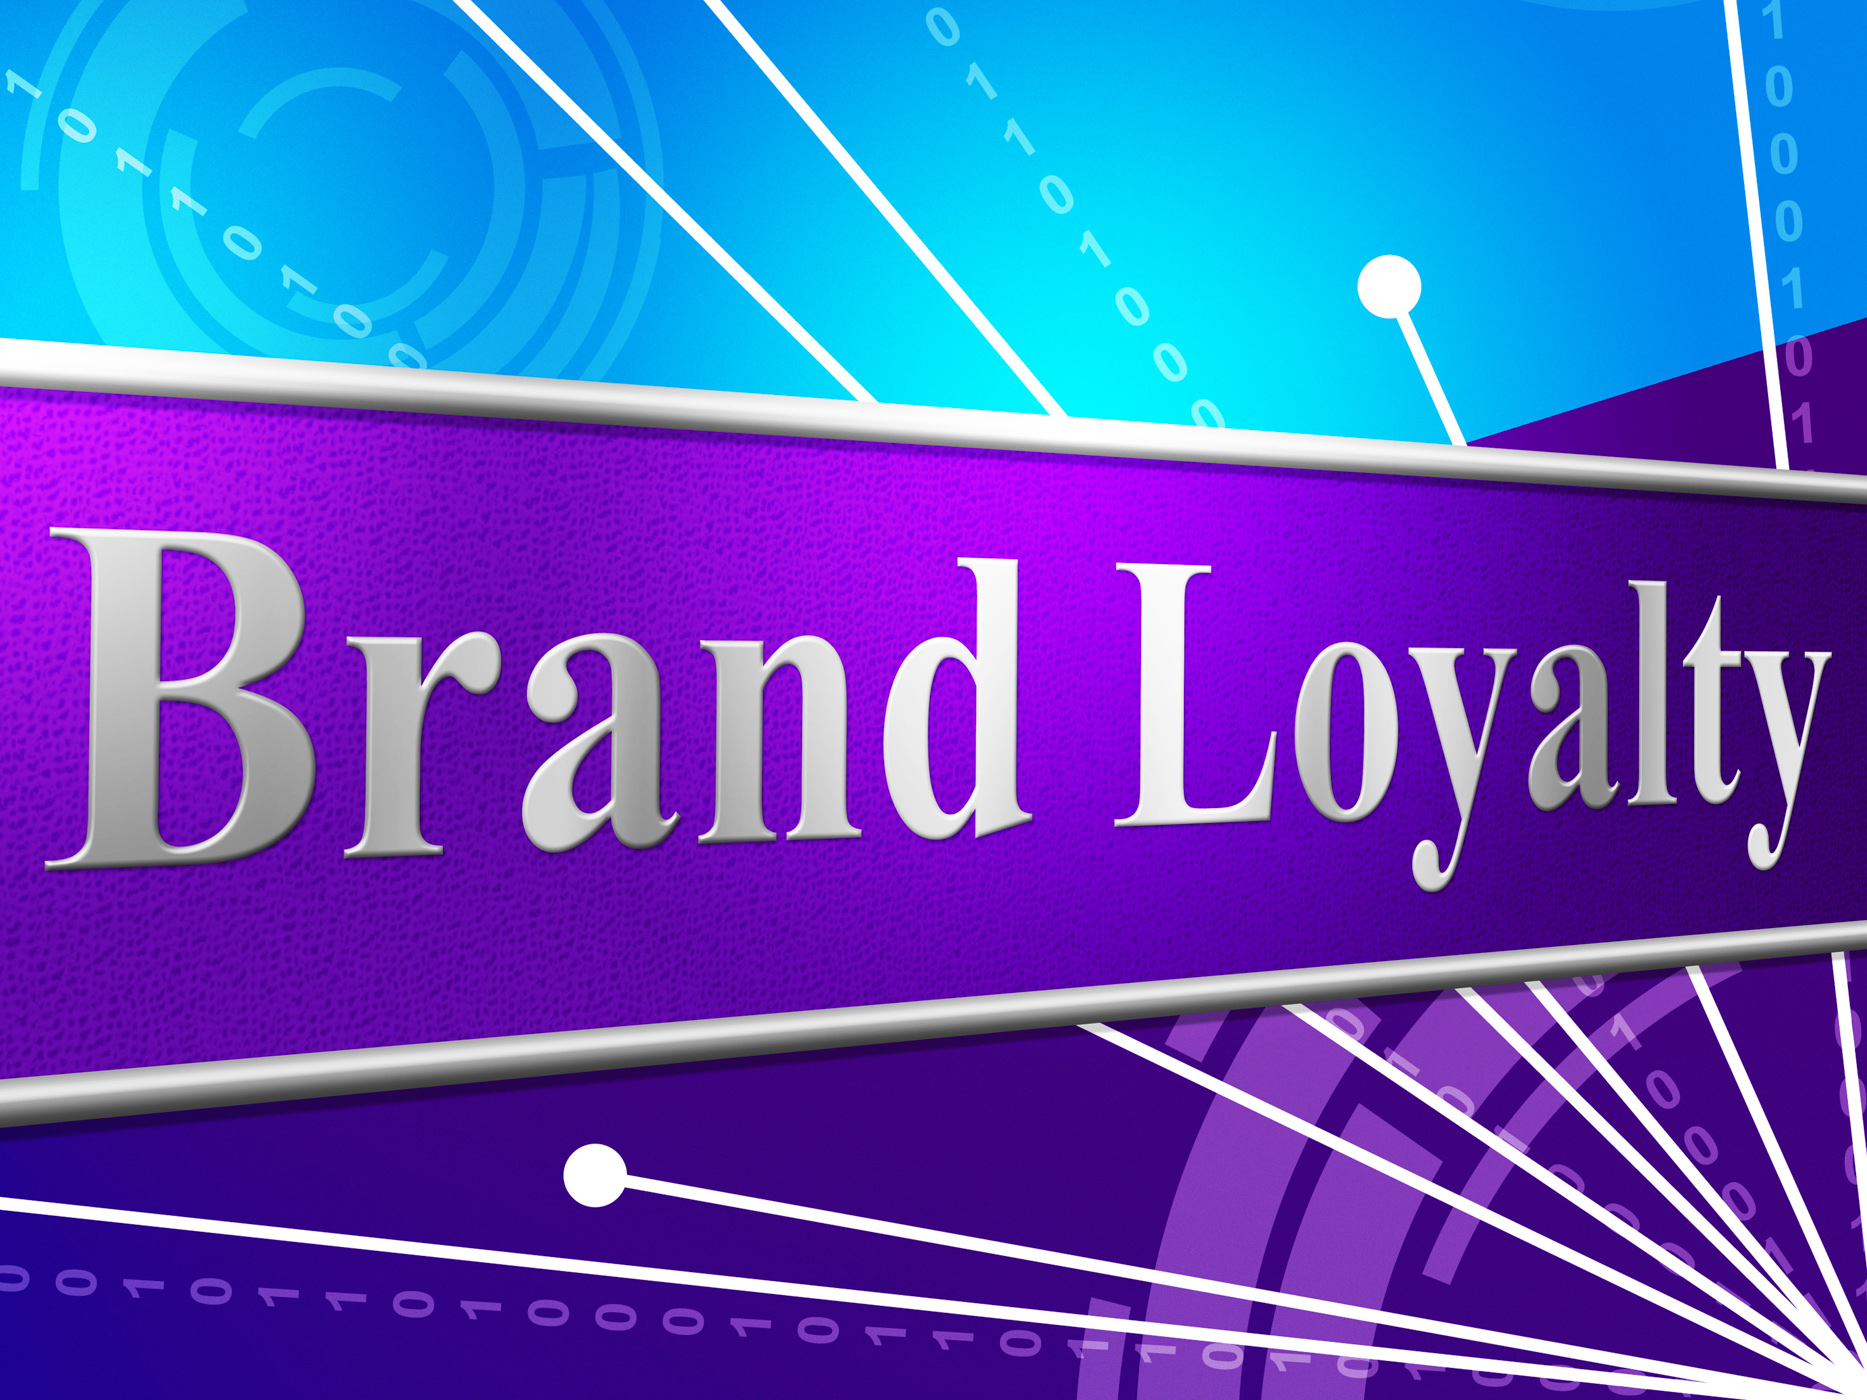 Brand loyalty shows company identity and branded photo